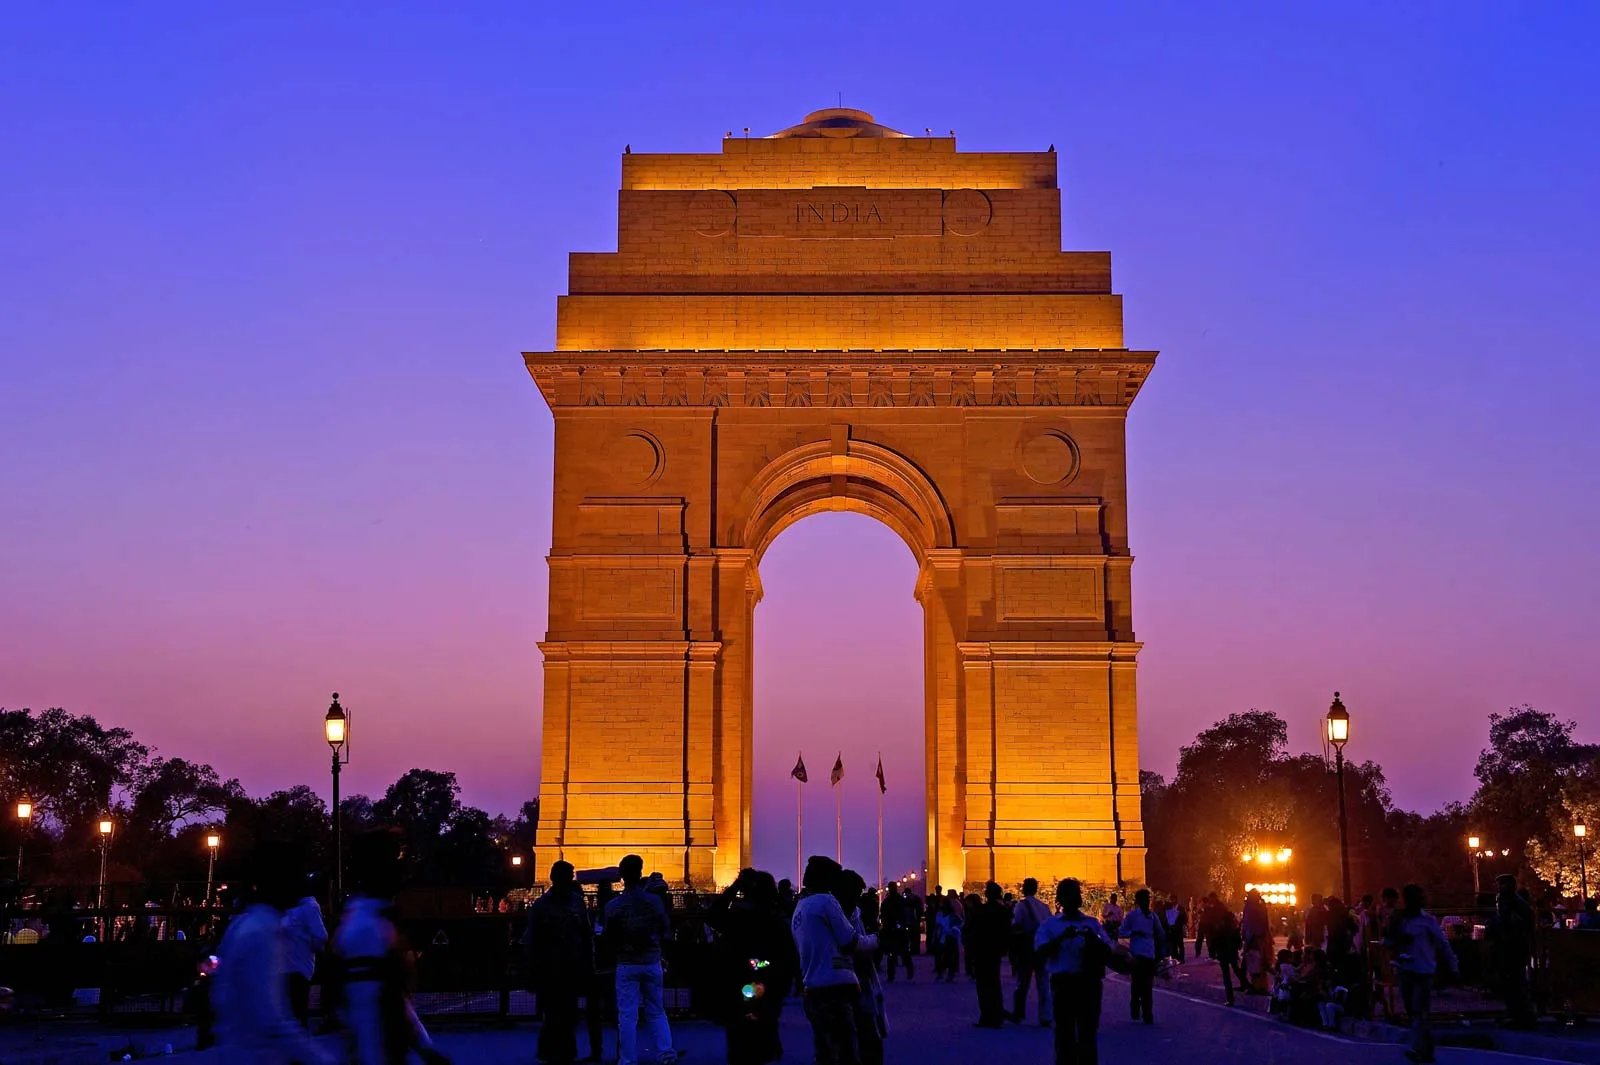 Delhi, the capital city of India, is a fascinating blend of rich history, diverse culture, and significant political importance.